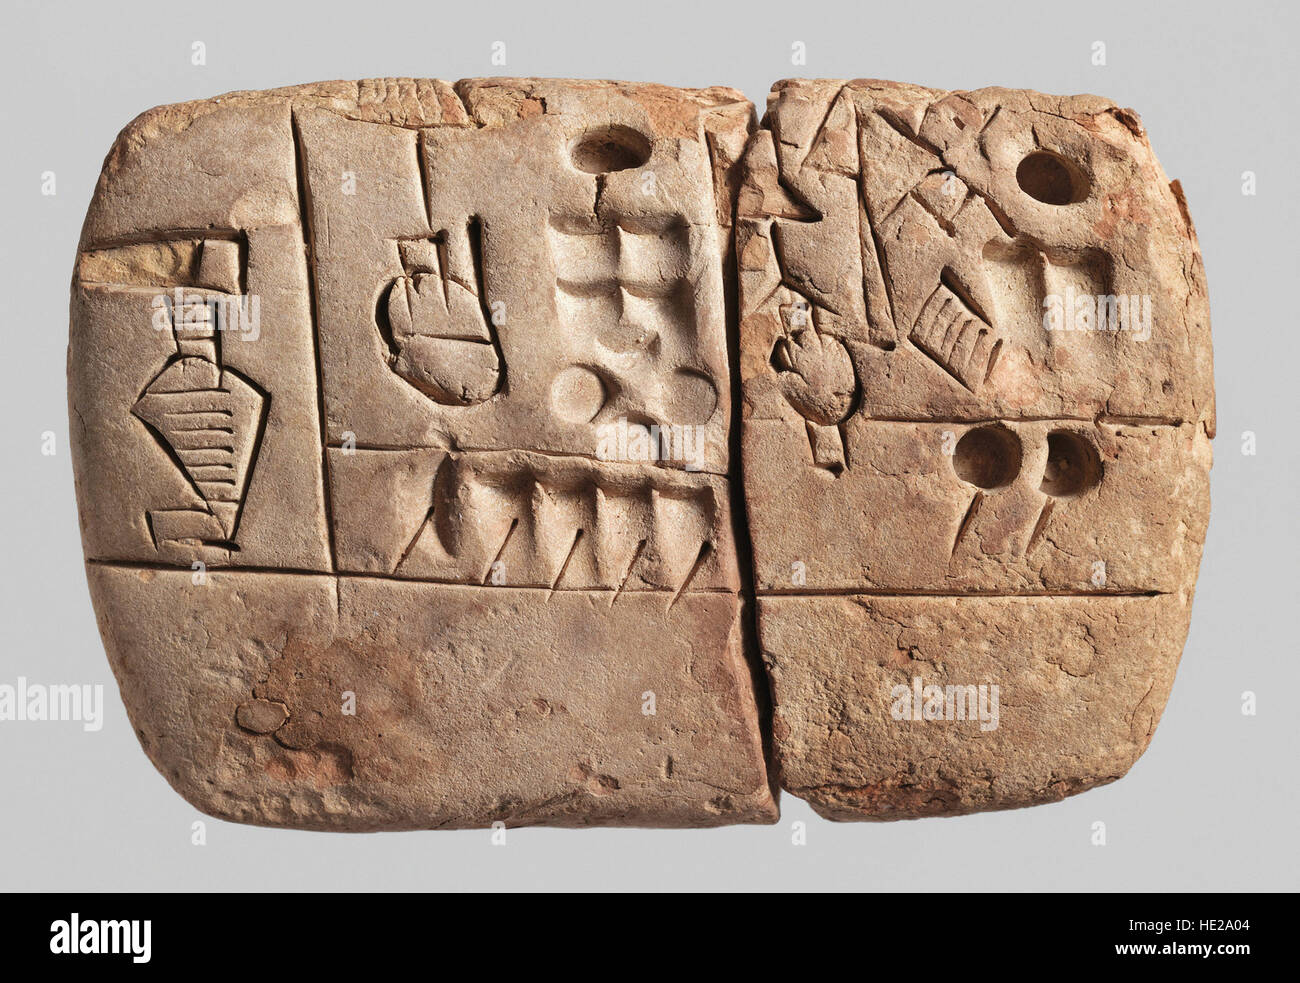 6010. Early clay Pictographic cuneiform tablet, Mesioitamia, Uruk, c. 3100-2900 BC. Text deals with administrative accounts concerning grain distribut Stock Photo